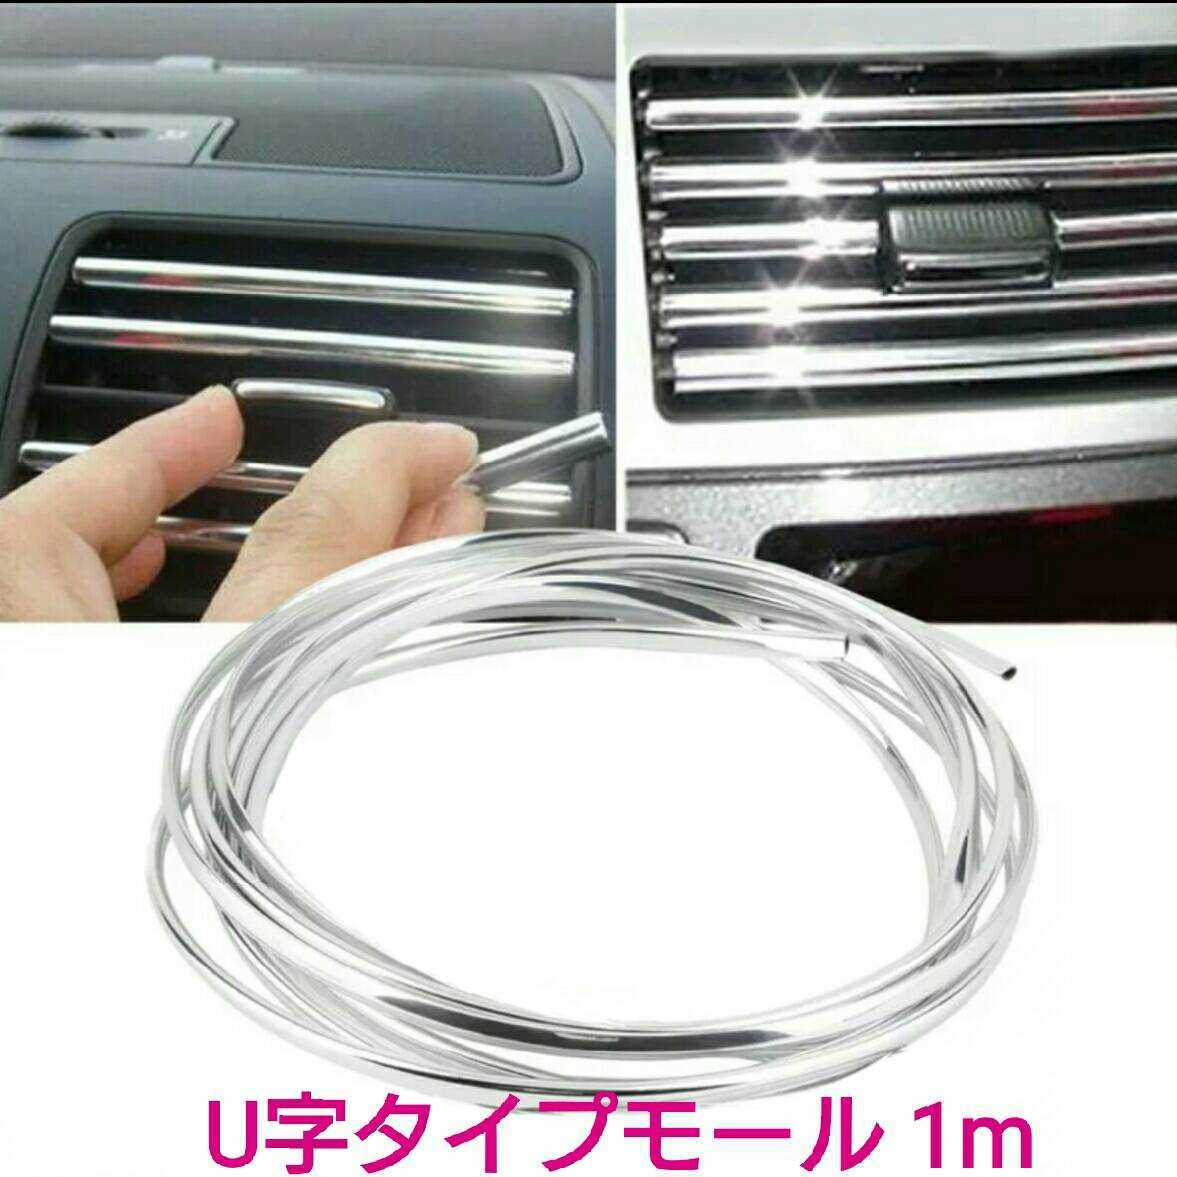 { postage 120 jpy ~}1m#U character type molding # air conditioner outlet port plating .* door molding * trunk * grill .! dress up for 